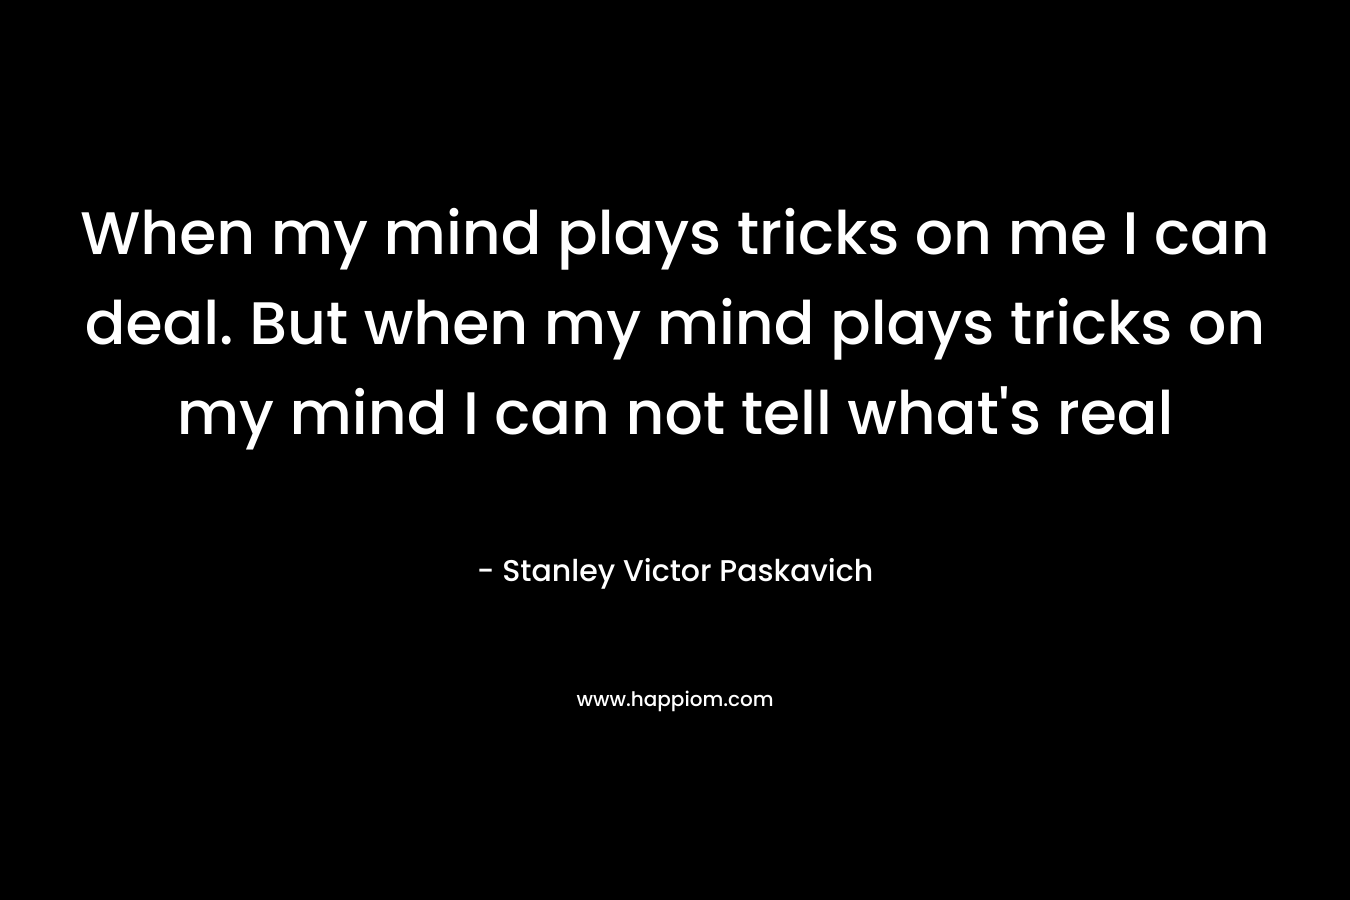 When my mind plays tricks on me I can deal. But when my mind plays tricks on my mind I can not tell what’s real – Stanley Victor Paskavich